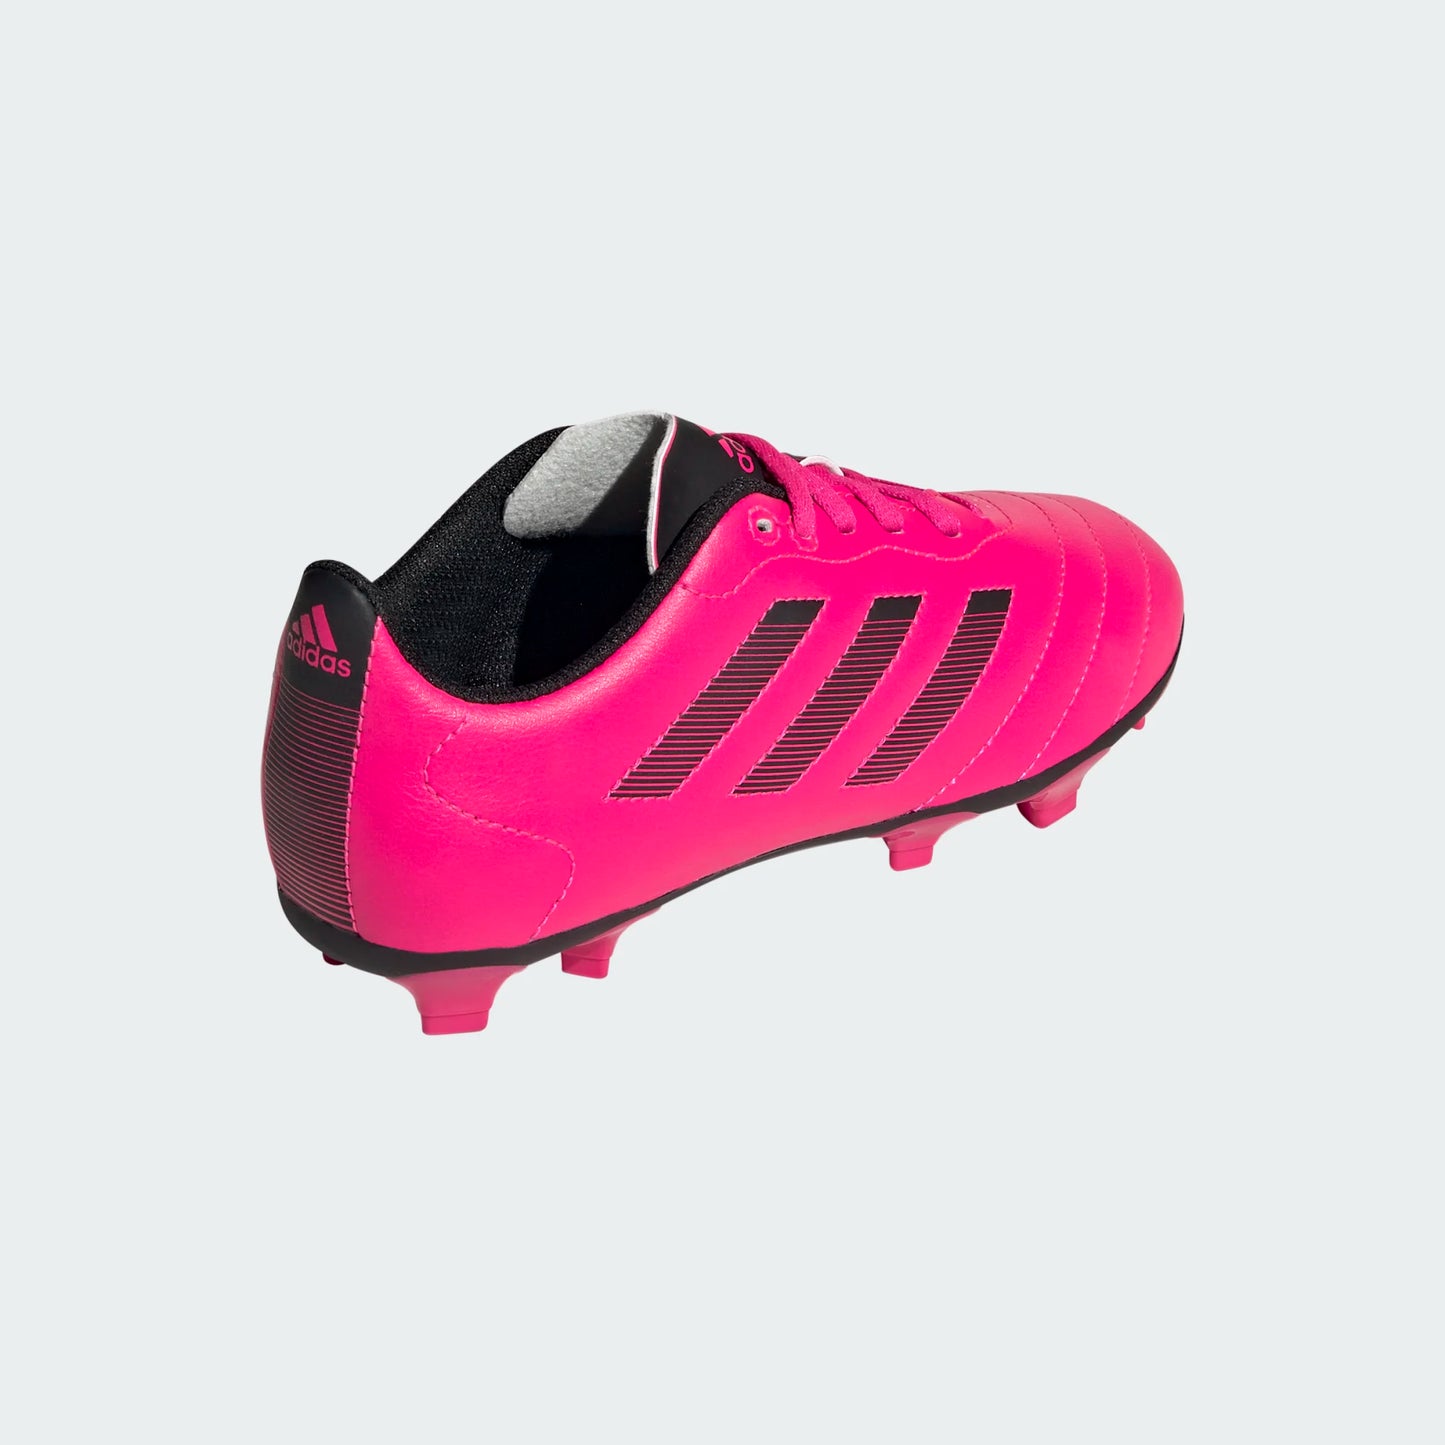 adidas Goletto VII Youth Soccer Cleats Pink